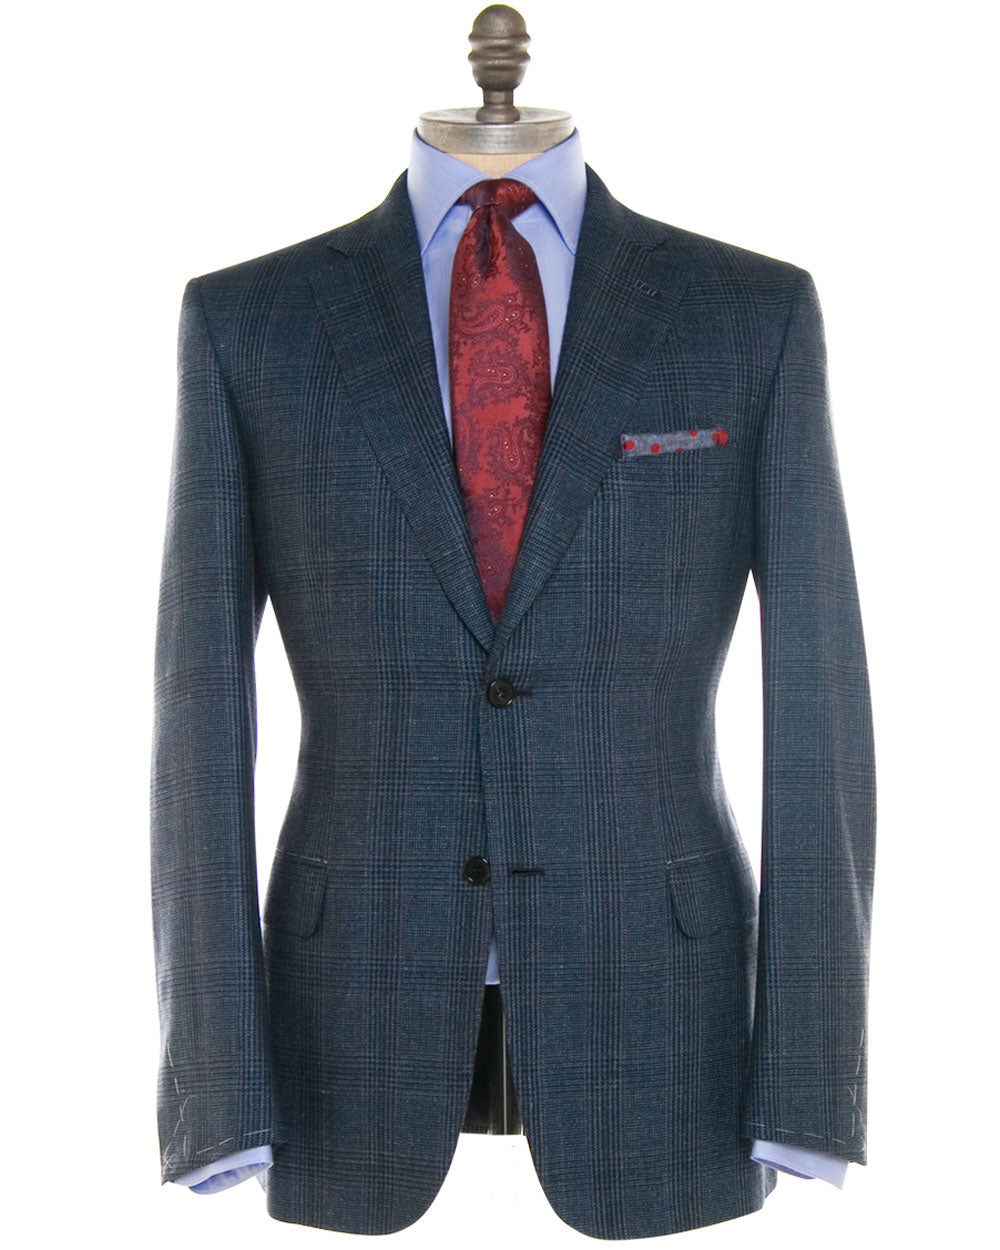 Teal and Rust Check Sportcoat